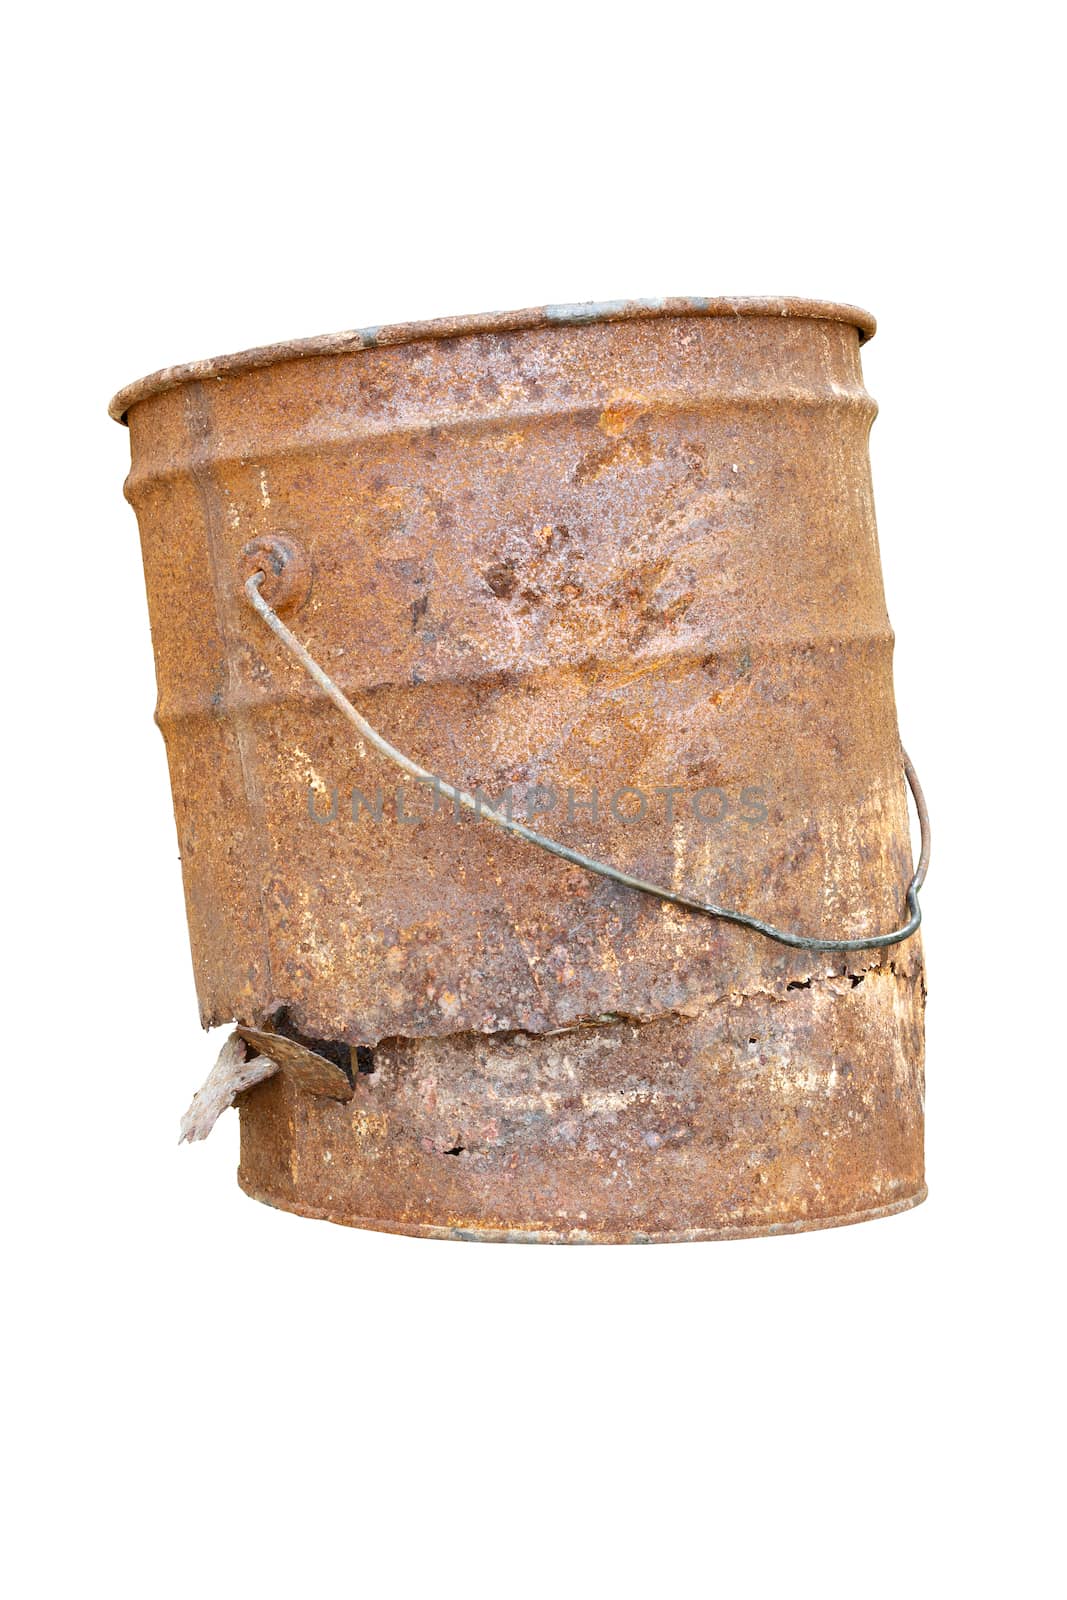 Old rust bucket on white background